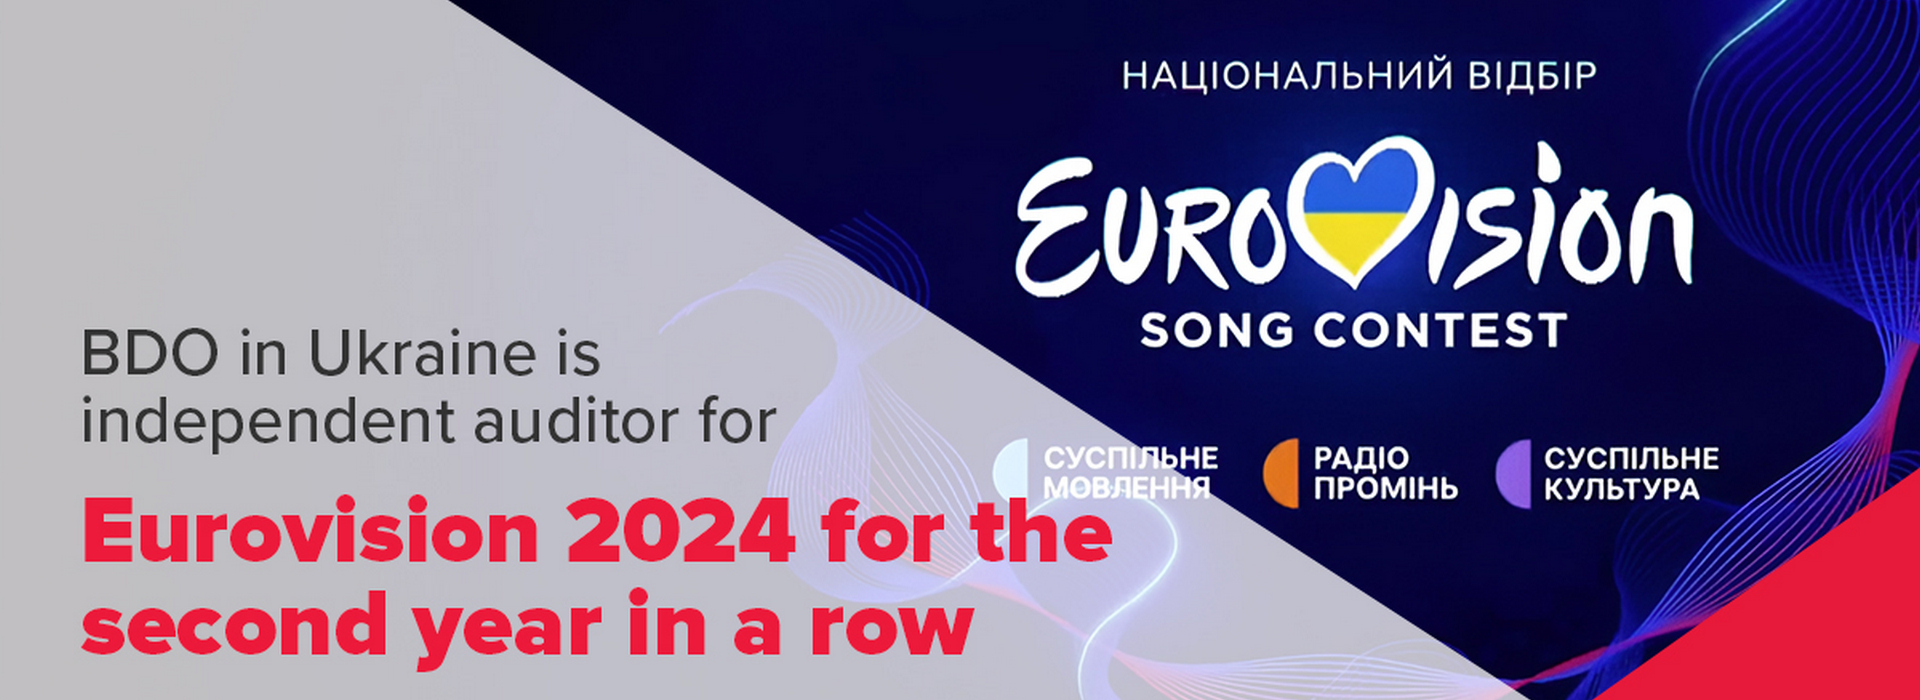 BDO in Ukraine Is Independent Auditor for Eurovision 2024 for the Second Year in a Row